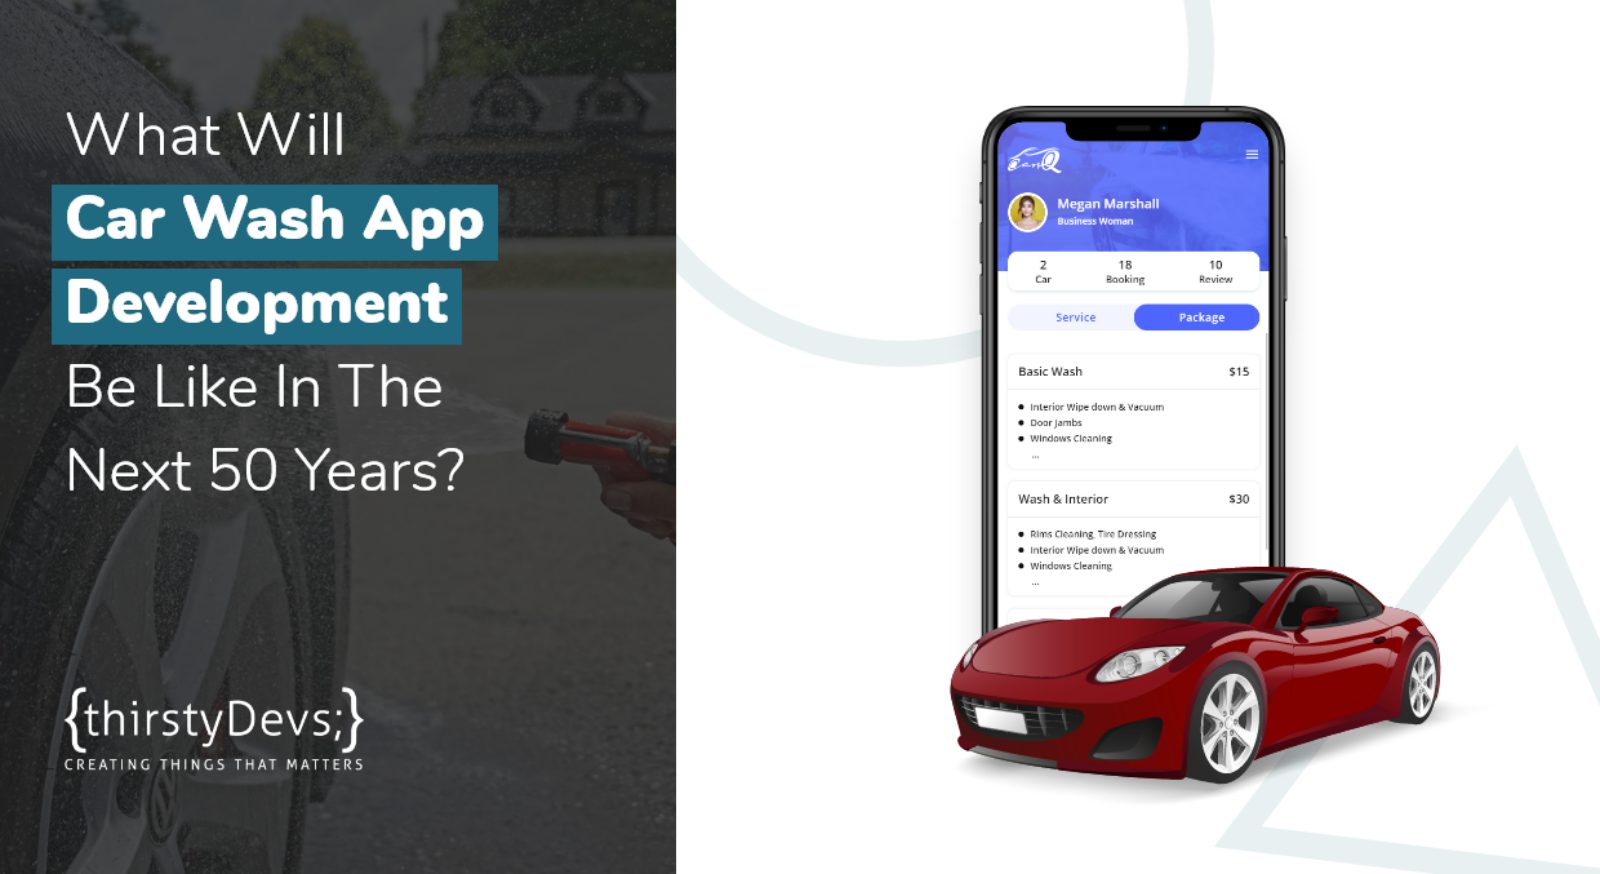 What Will Car Wash App Development Be Like In The Next 50 Years?